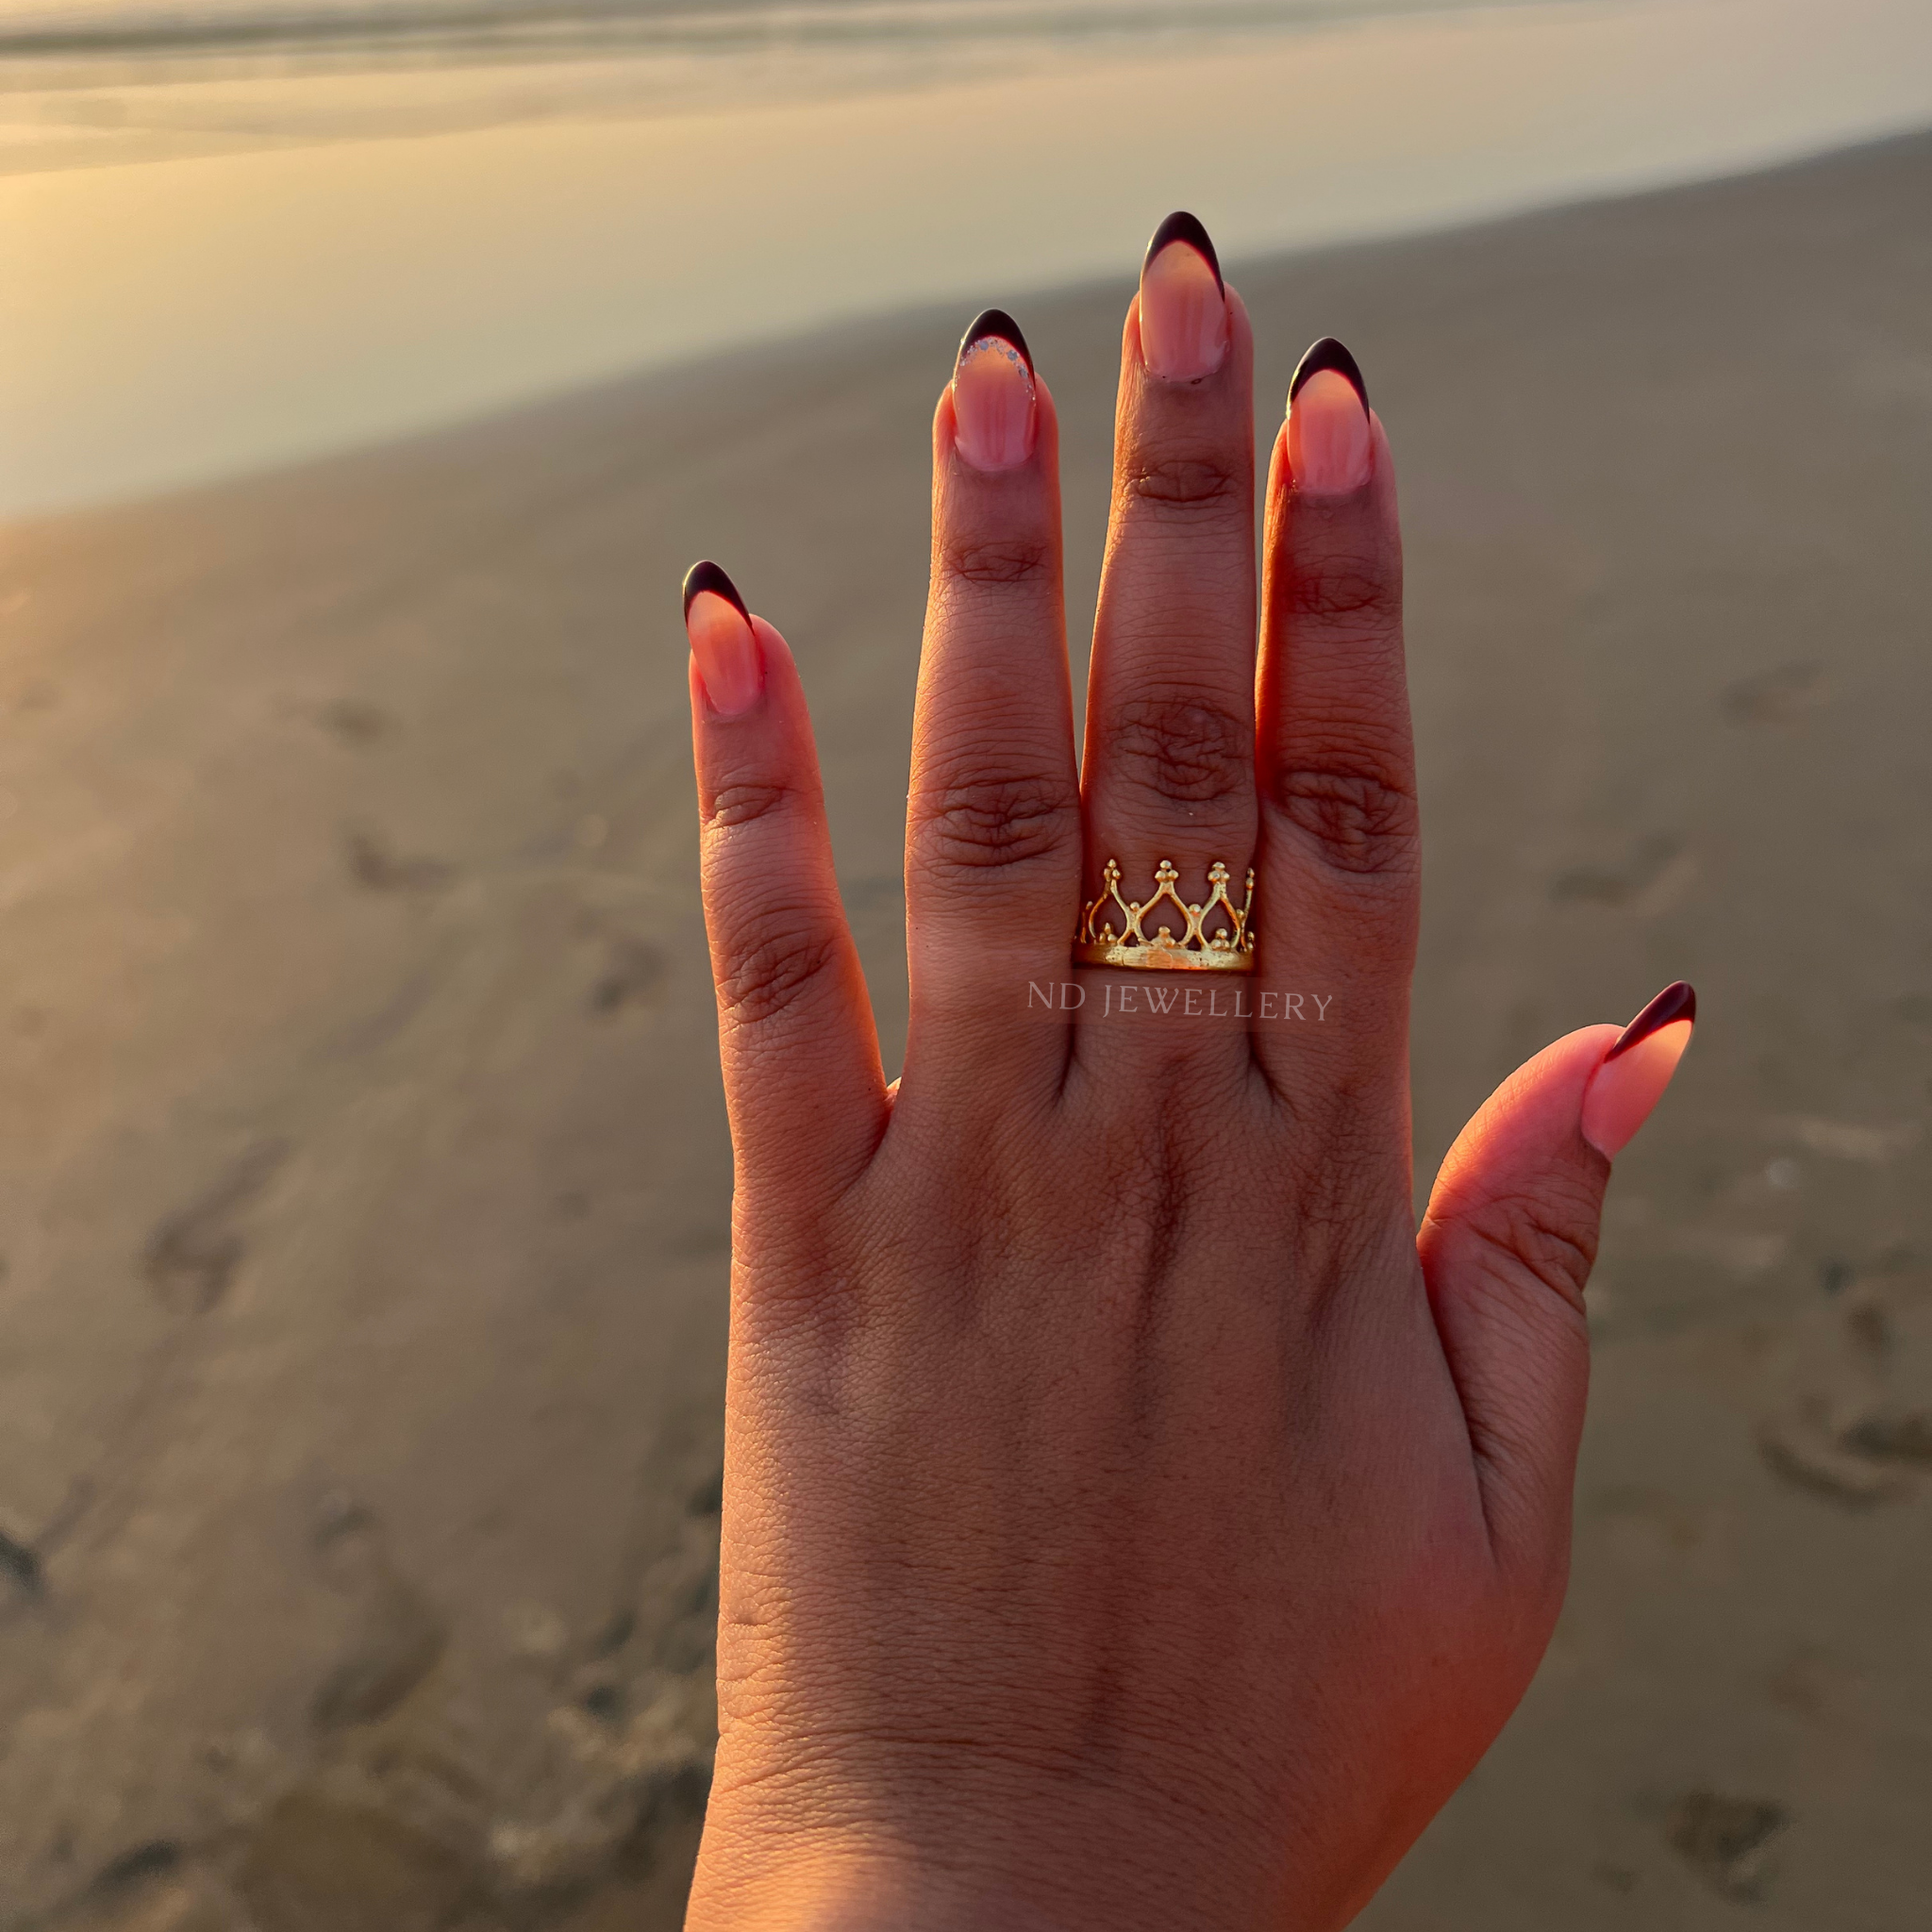 Blowin New Crown Rings, Her King His Queen Rings, His Her Gold Color  Stainless Steel Ring for Valentines Day, Wedding Anniversary Rings :  Amazon.se: Fashion